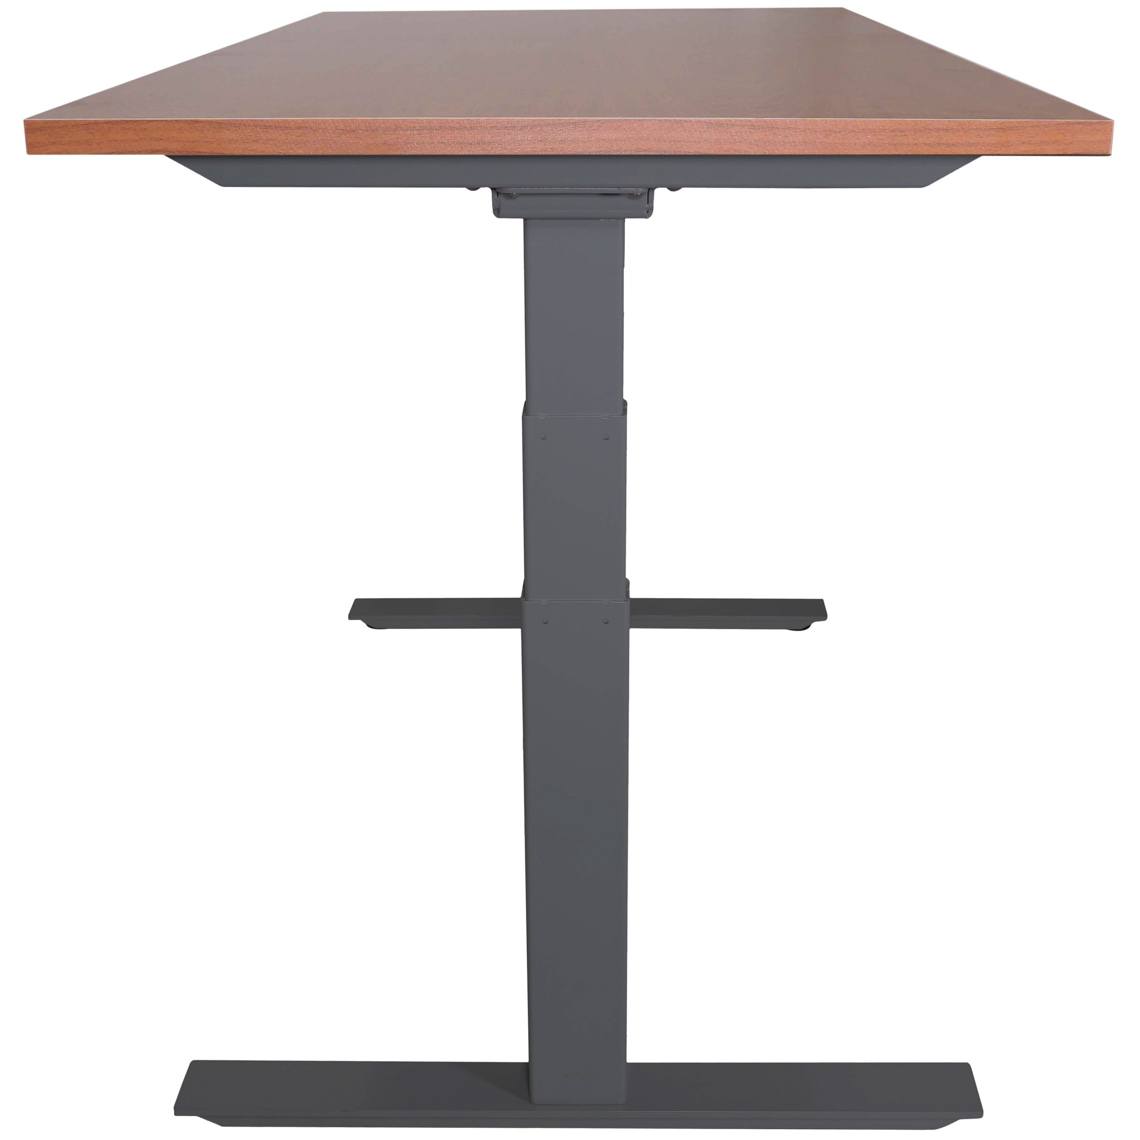 A6 Adjustable Sit To Stand Desk 24"- 50" w/ Wood 30" x 48" Top - view 3